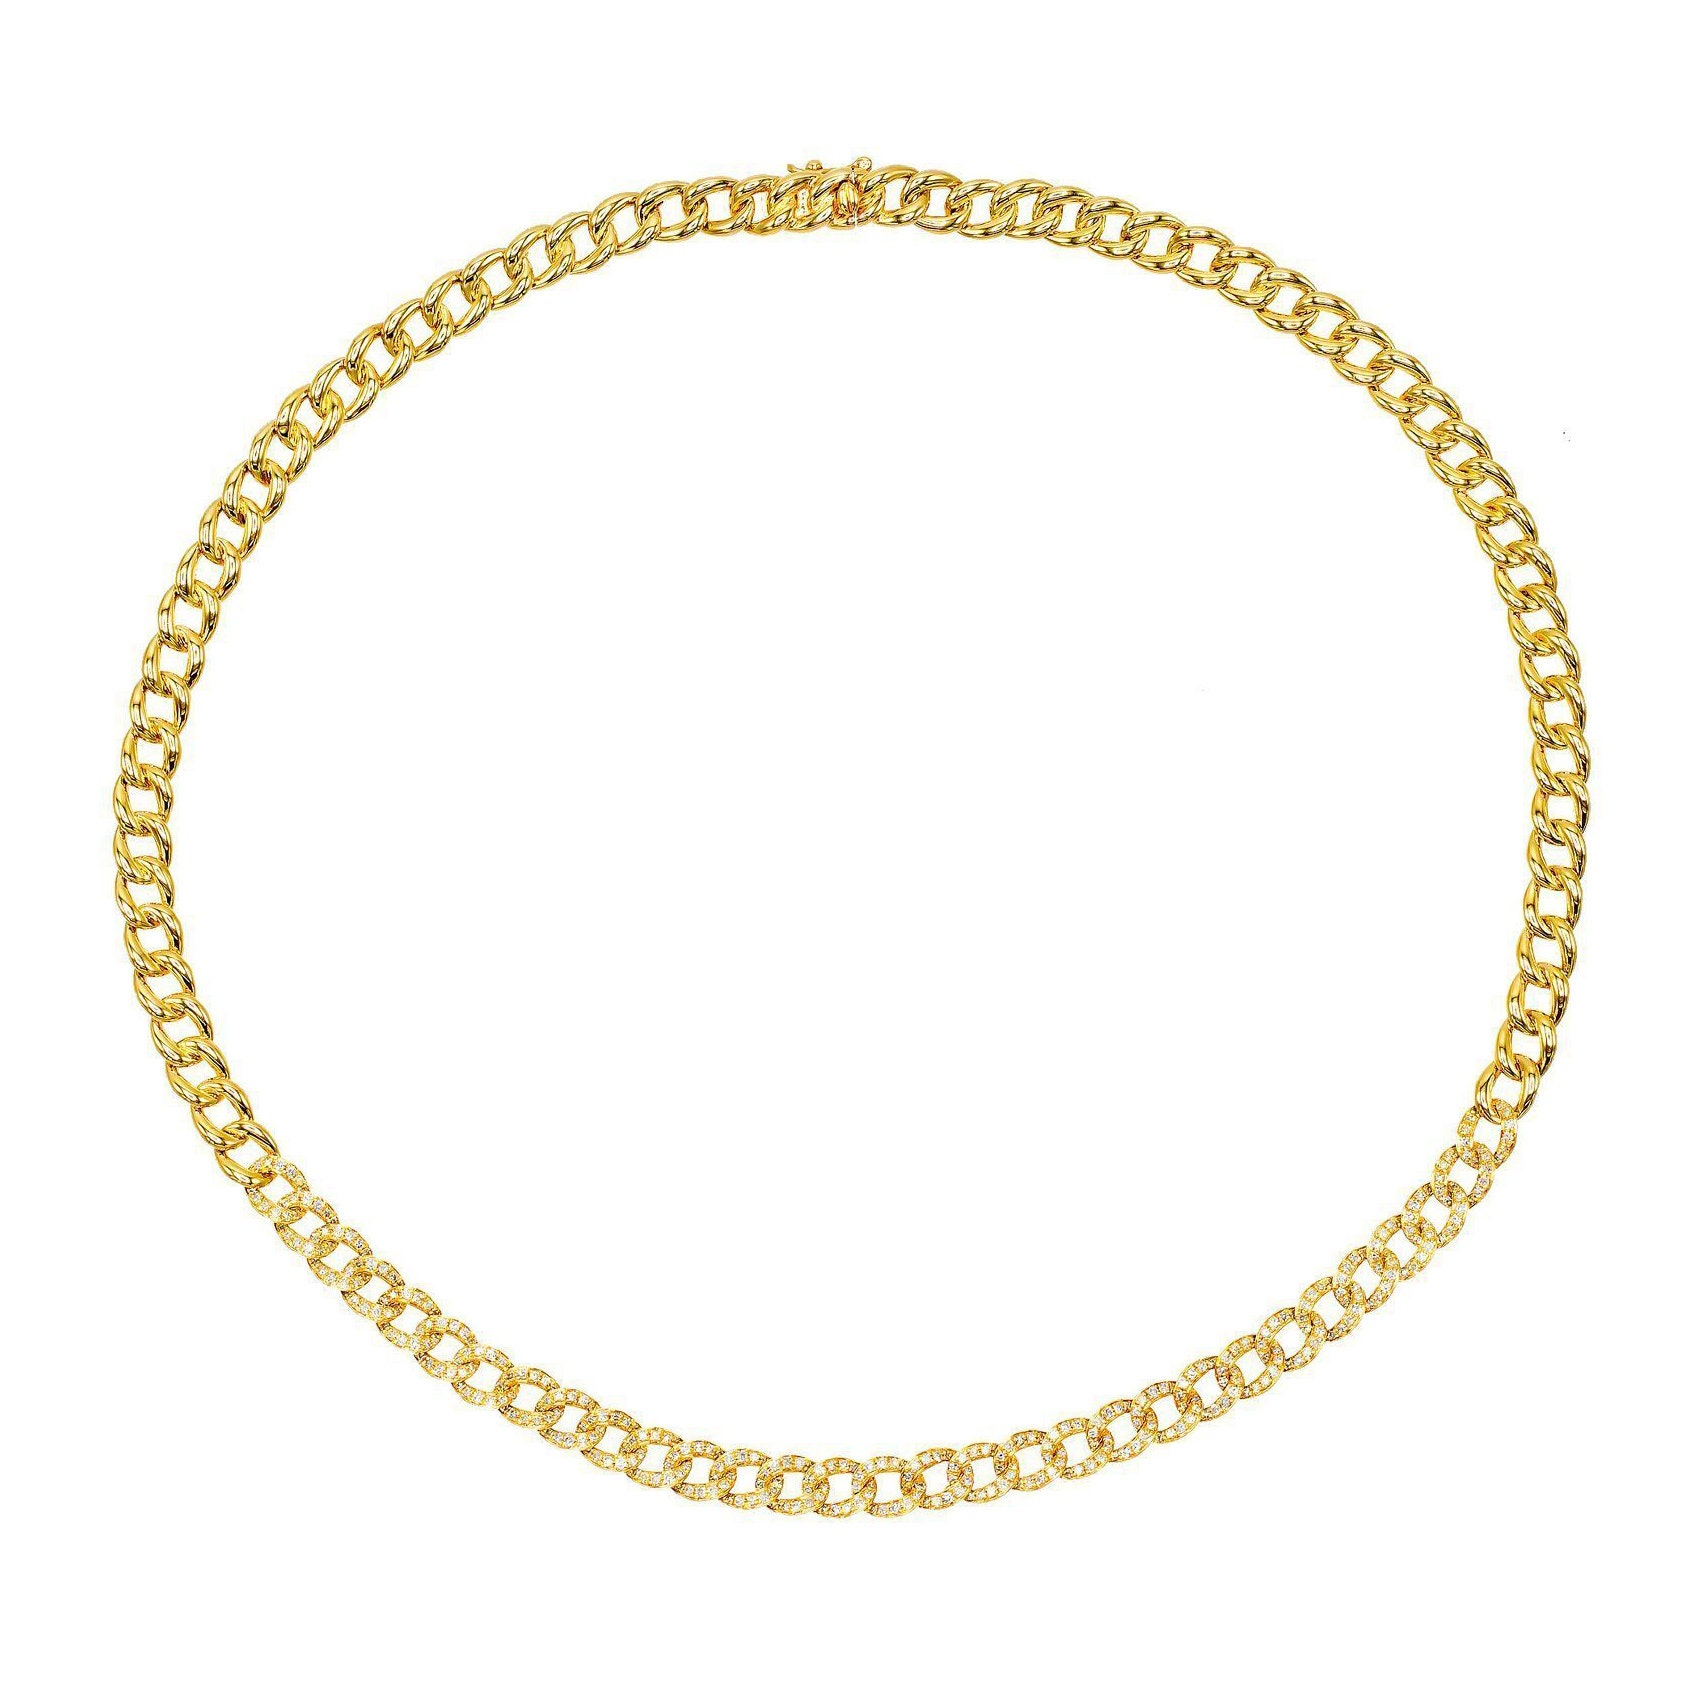 1.50Ct Pave Diamond Chain Necklace With 14Kt Gold Yellow Finish, Diamond Chain Necklace, Gift For Her